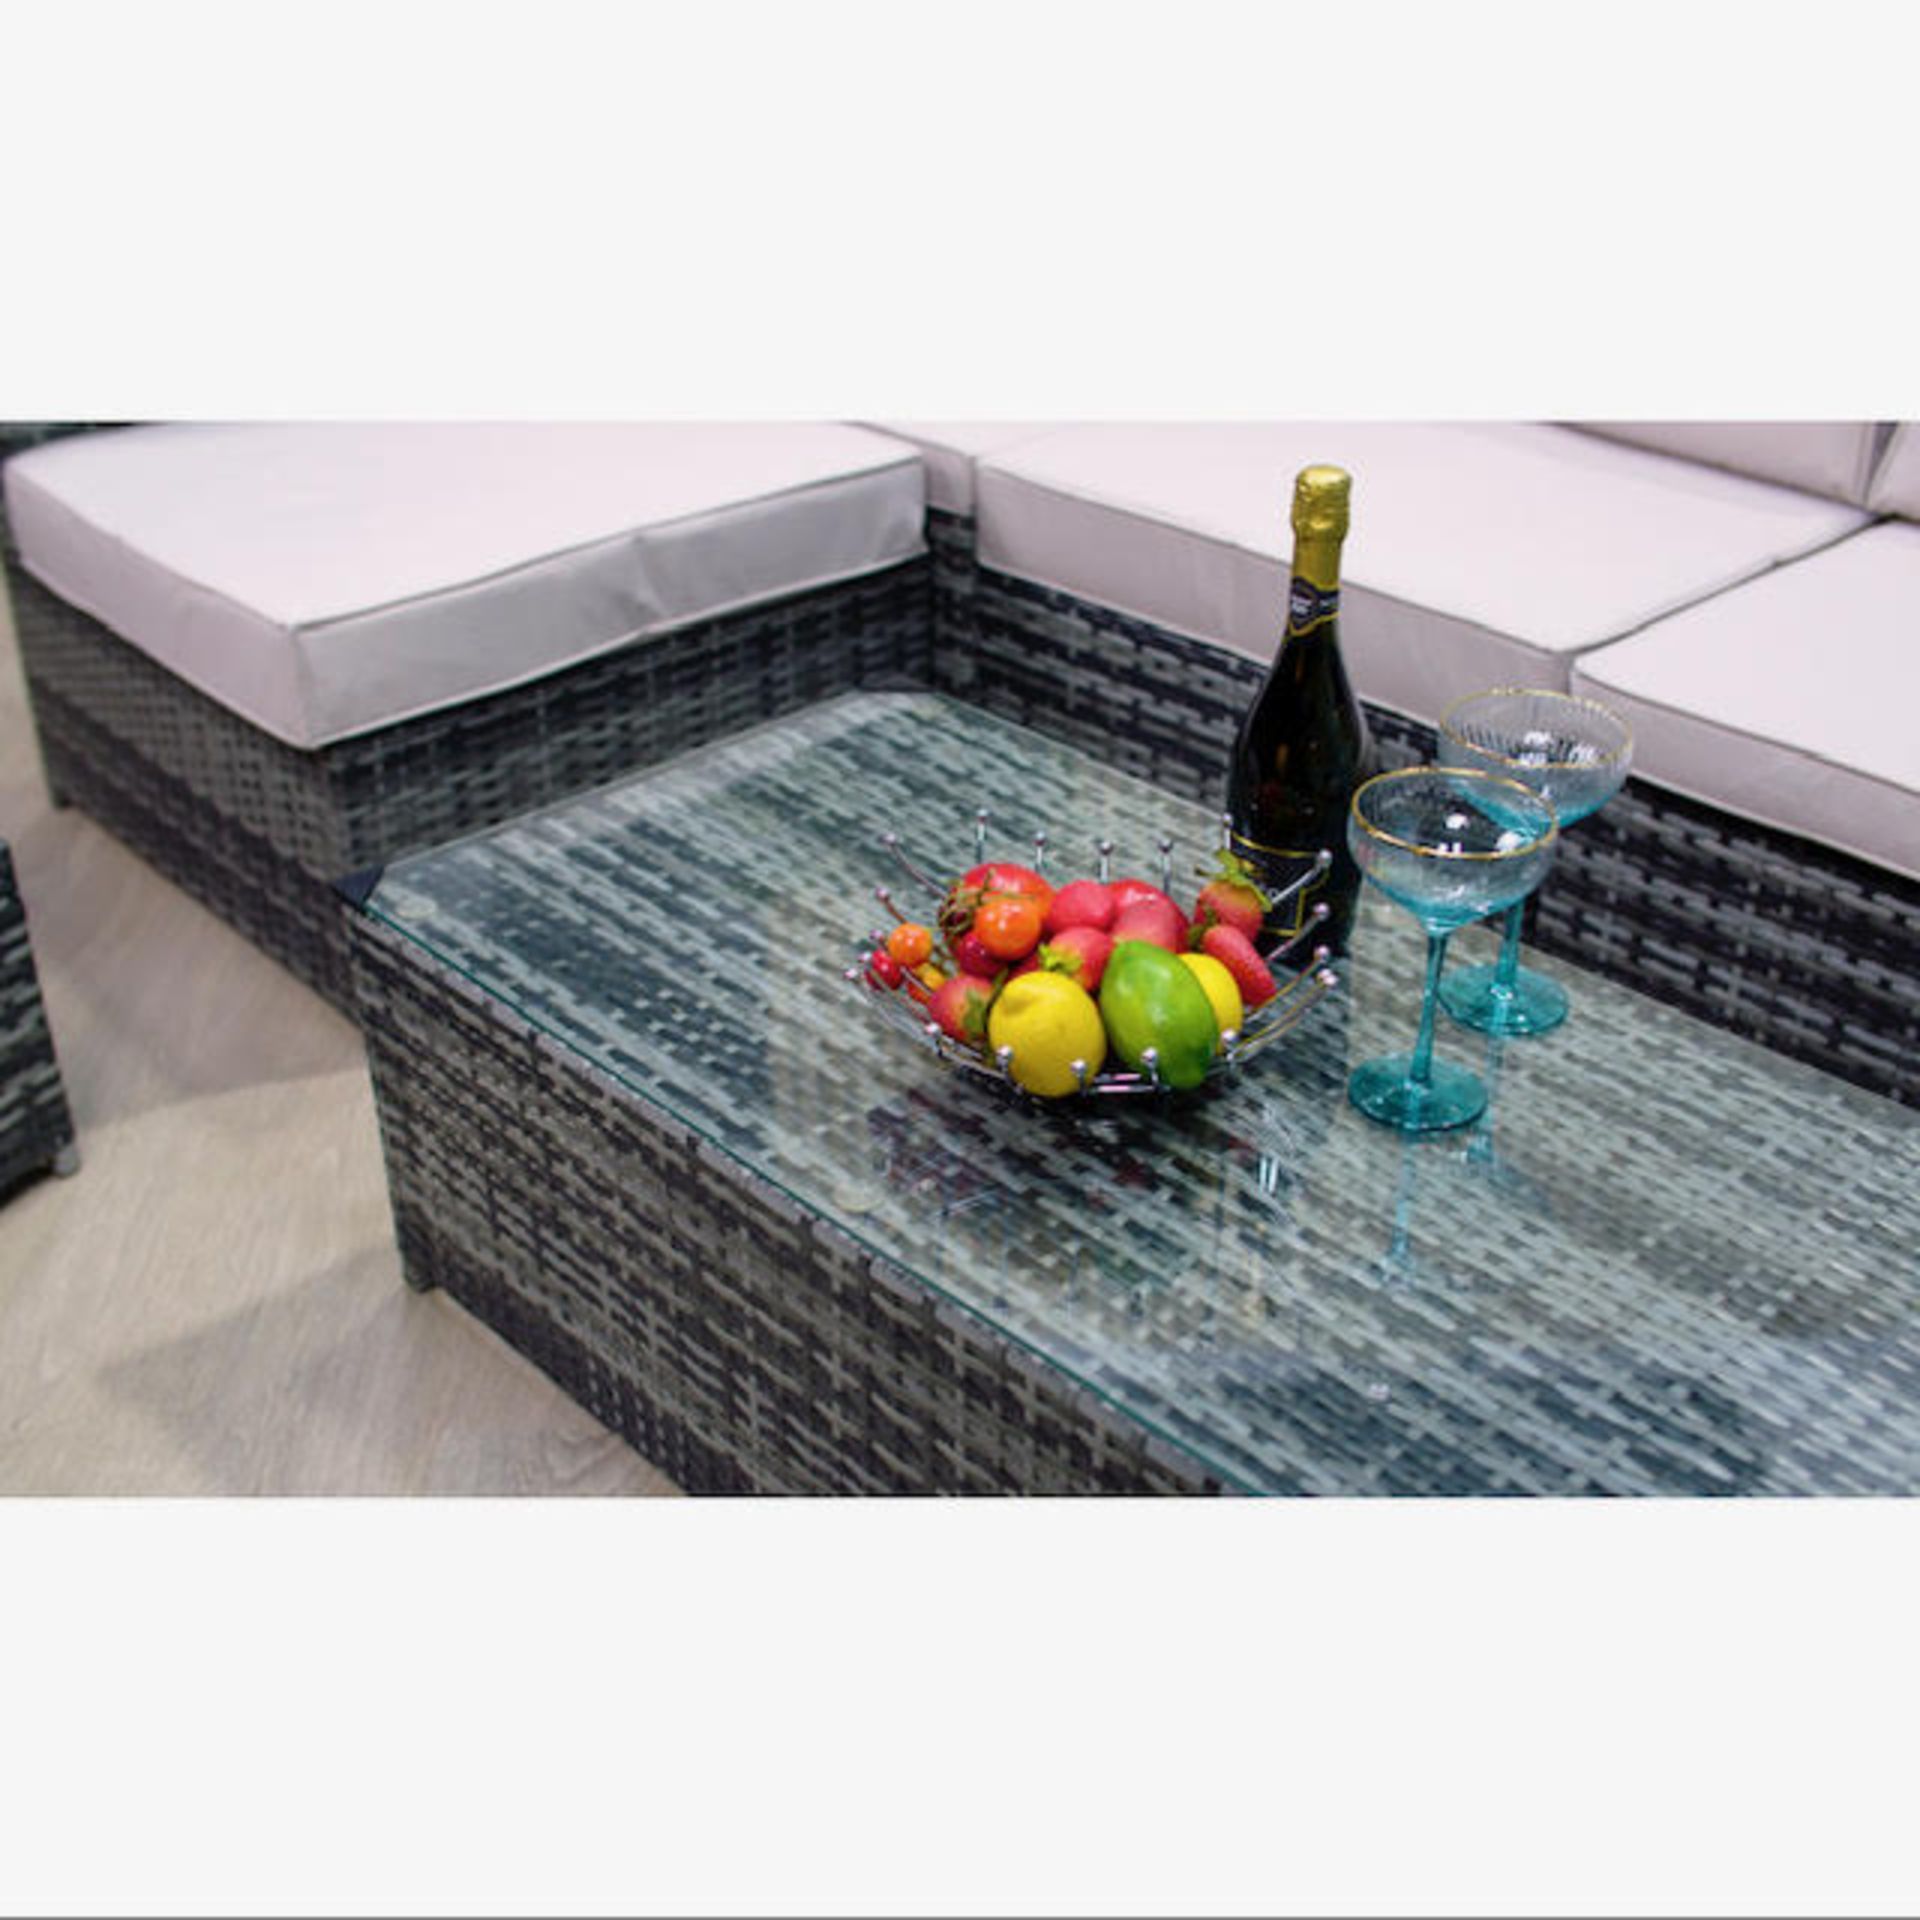 TRADE LOT 5 X BRAND NEW LINEA 7 PIECE LUXURY RATTAN SETS RRP £1499 EACH. PERFECT FOR THOSE SUMMER - Image 2 of 6